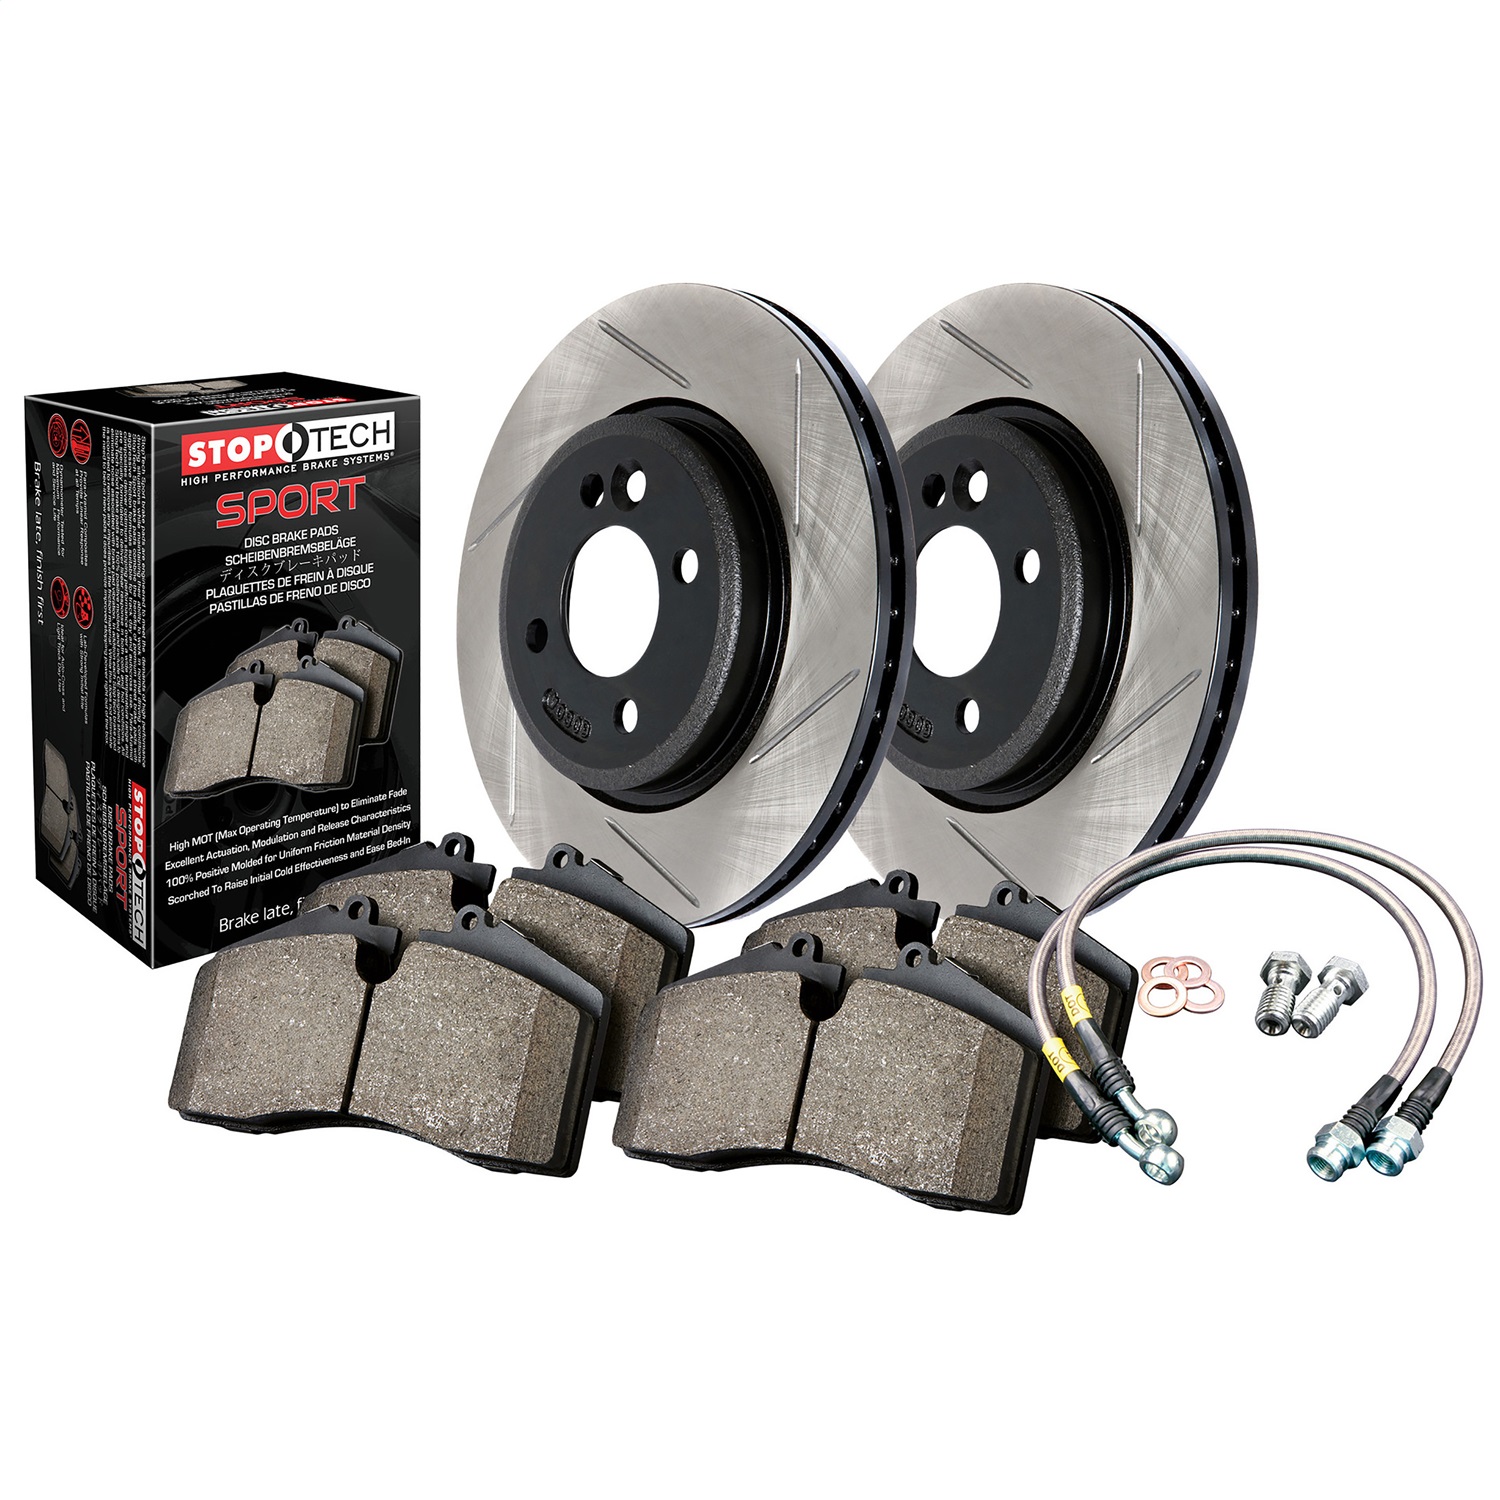 StopTech 977.34015R Sport Disc Brake Kit w/Slotted Rotors